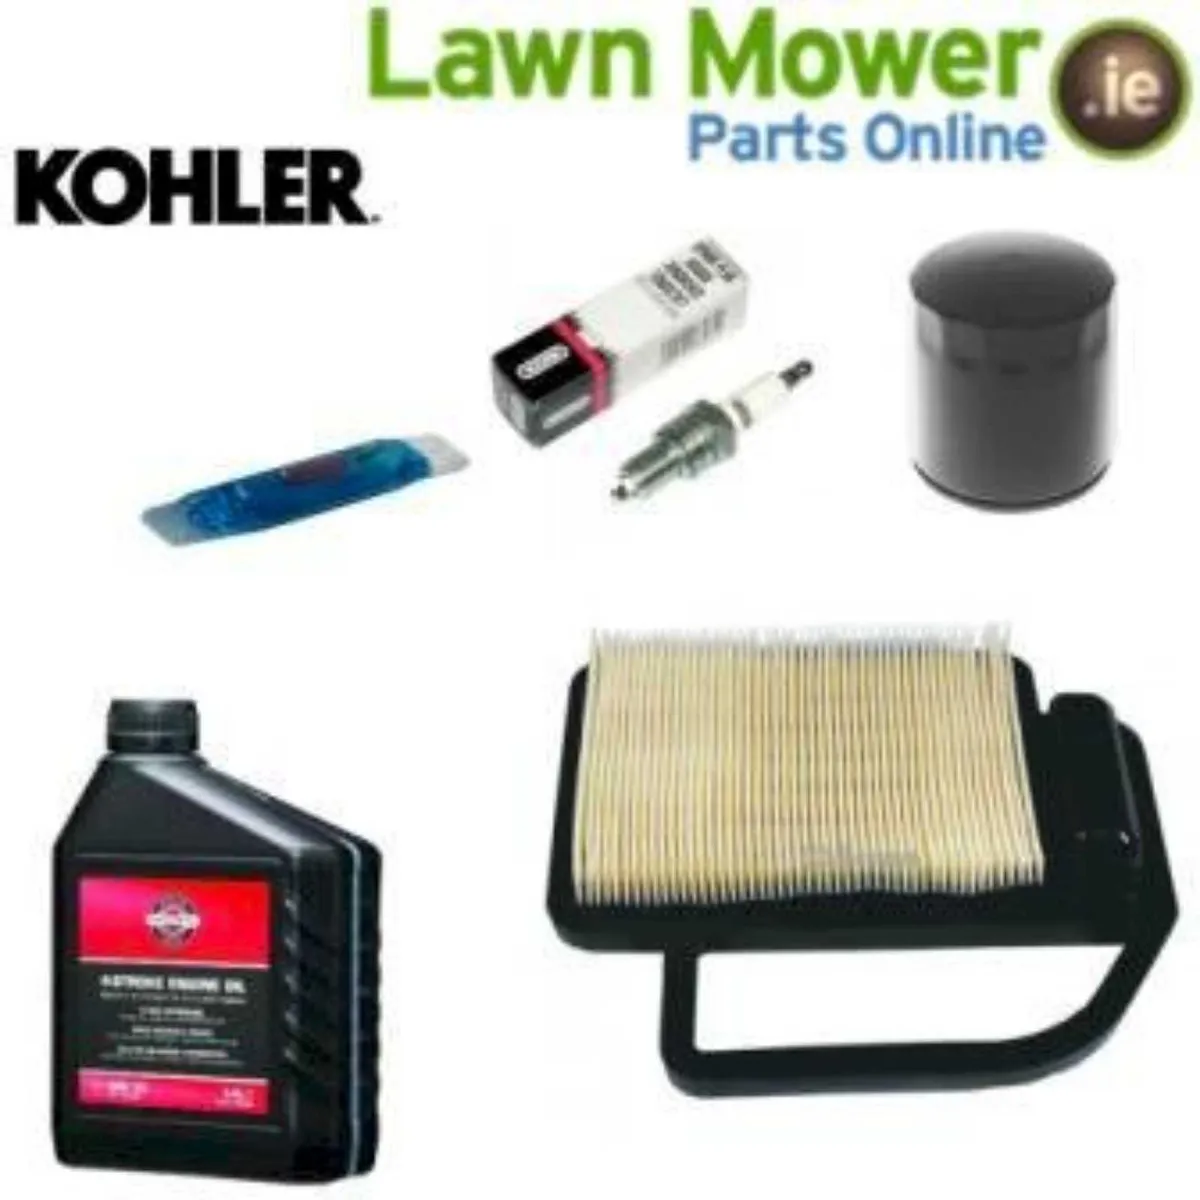 Lawnmower Service Kits - From €12.99 - Image 1